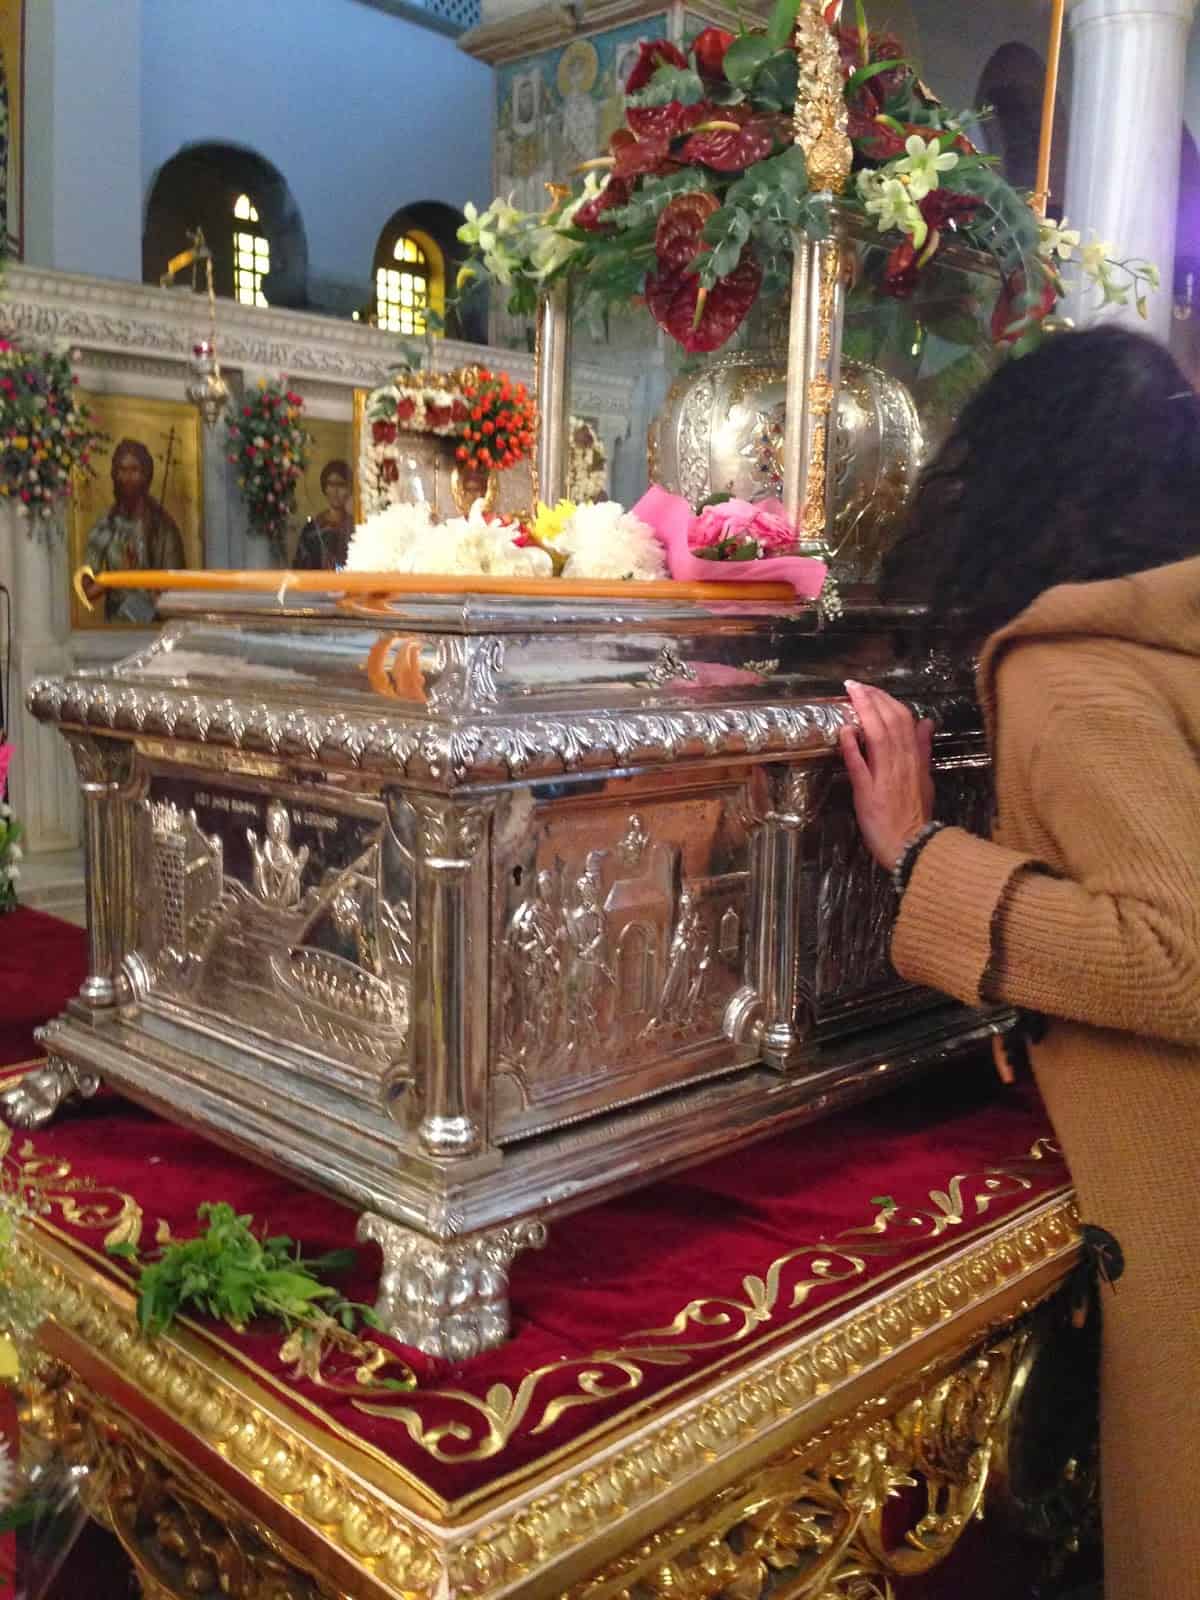 Relics of St. Demetrios at the Church of St. Demetrios in Thessaloniki, Greece